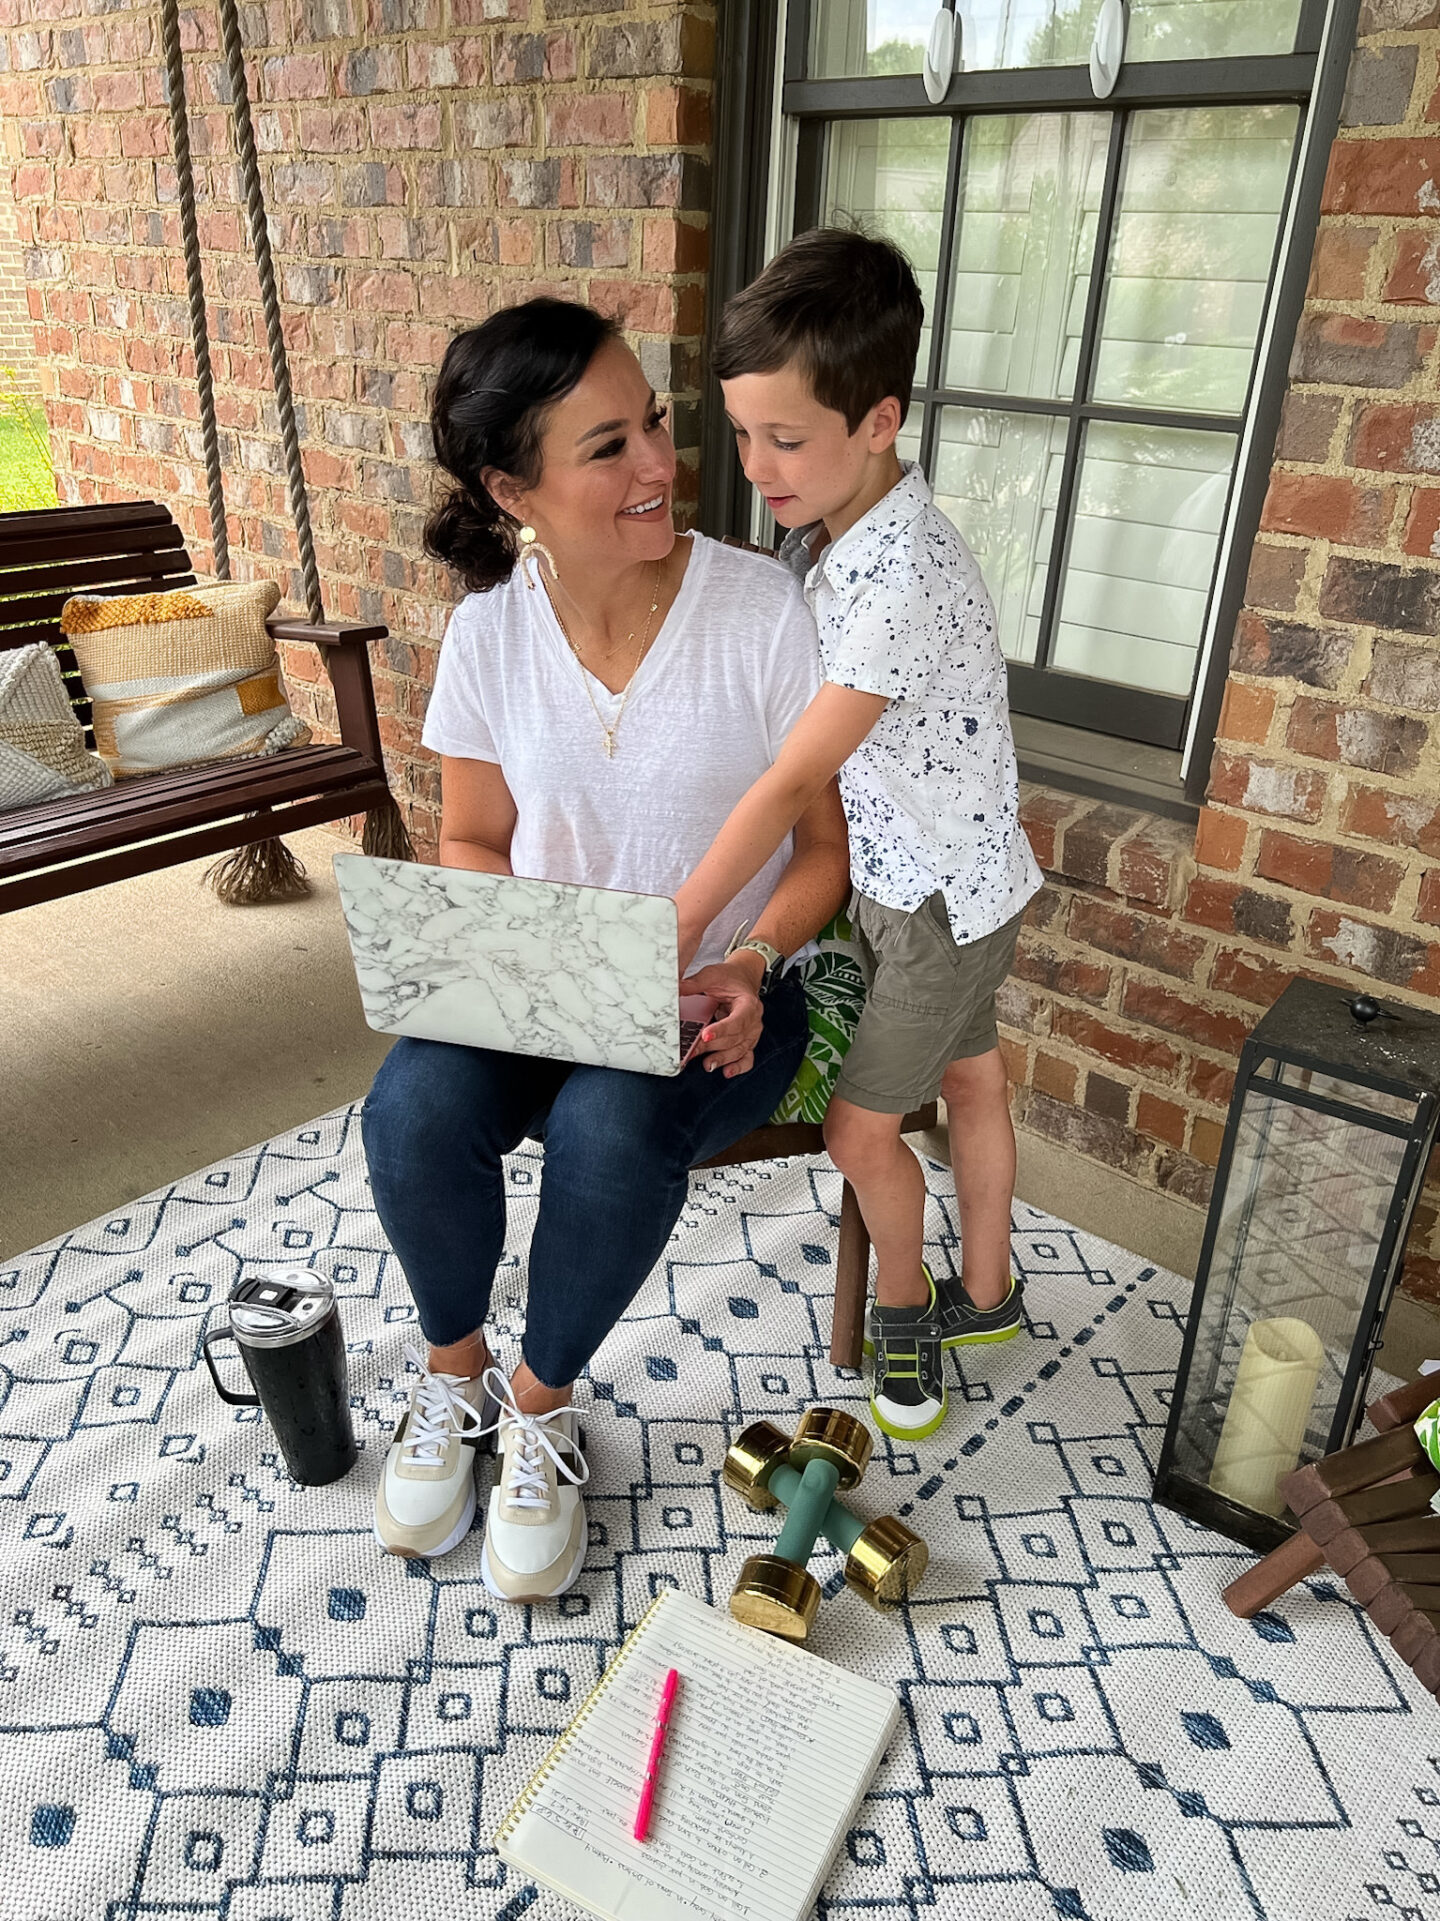 Christian Birmingham podcaster, boy mom, & health coach, Heather Brown, shares parenting tips for social media boundaries in today's digital world.